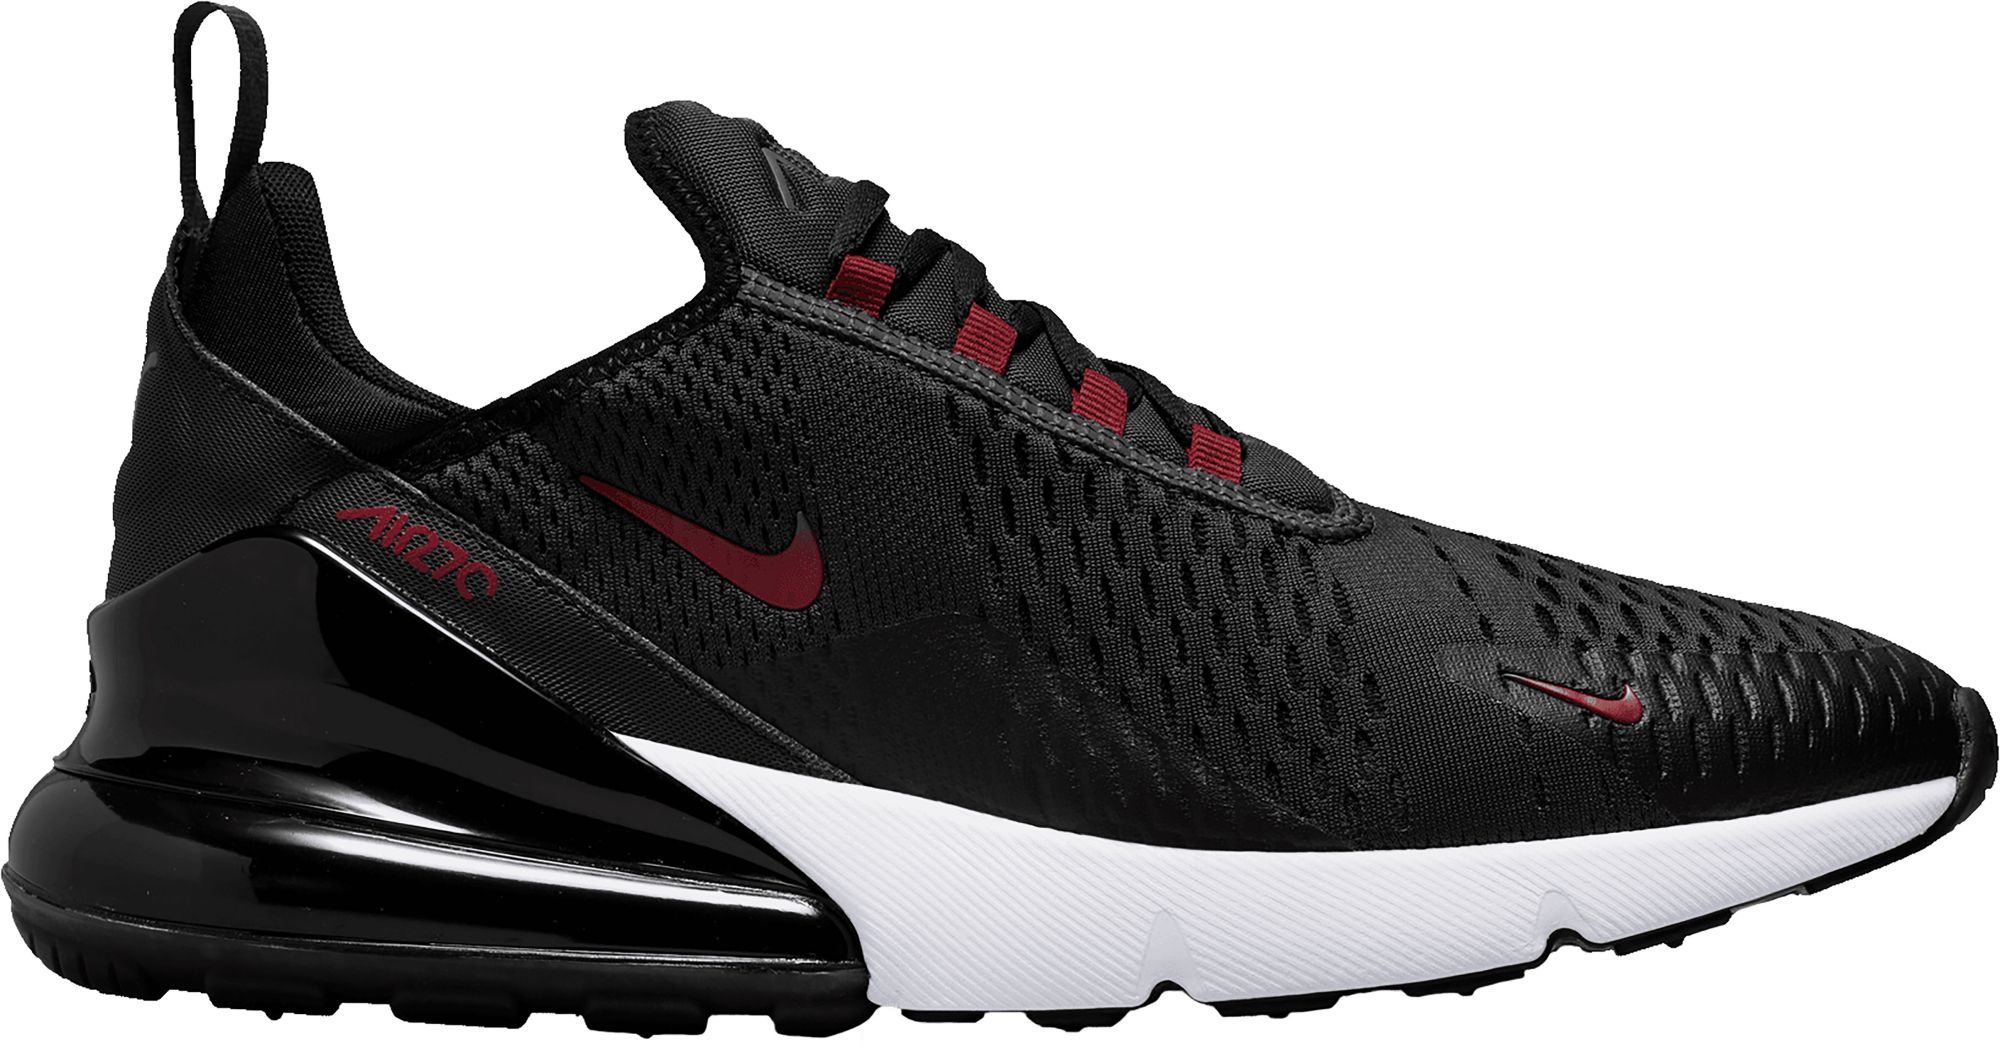 nike women's air max 270 shoes black and white